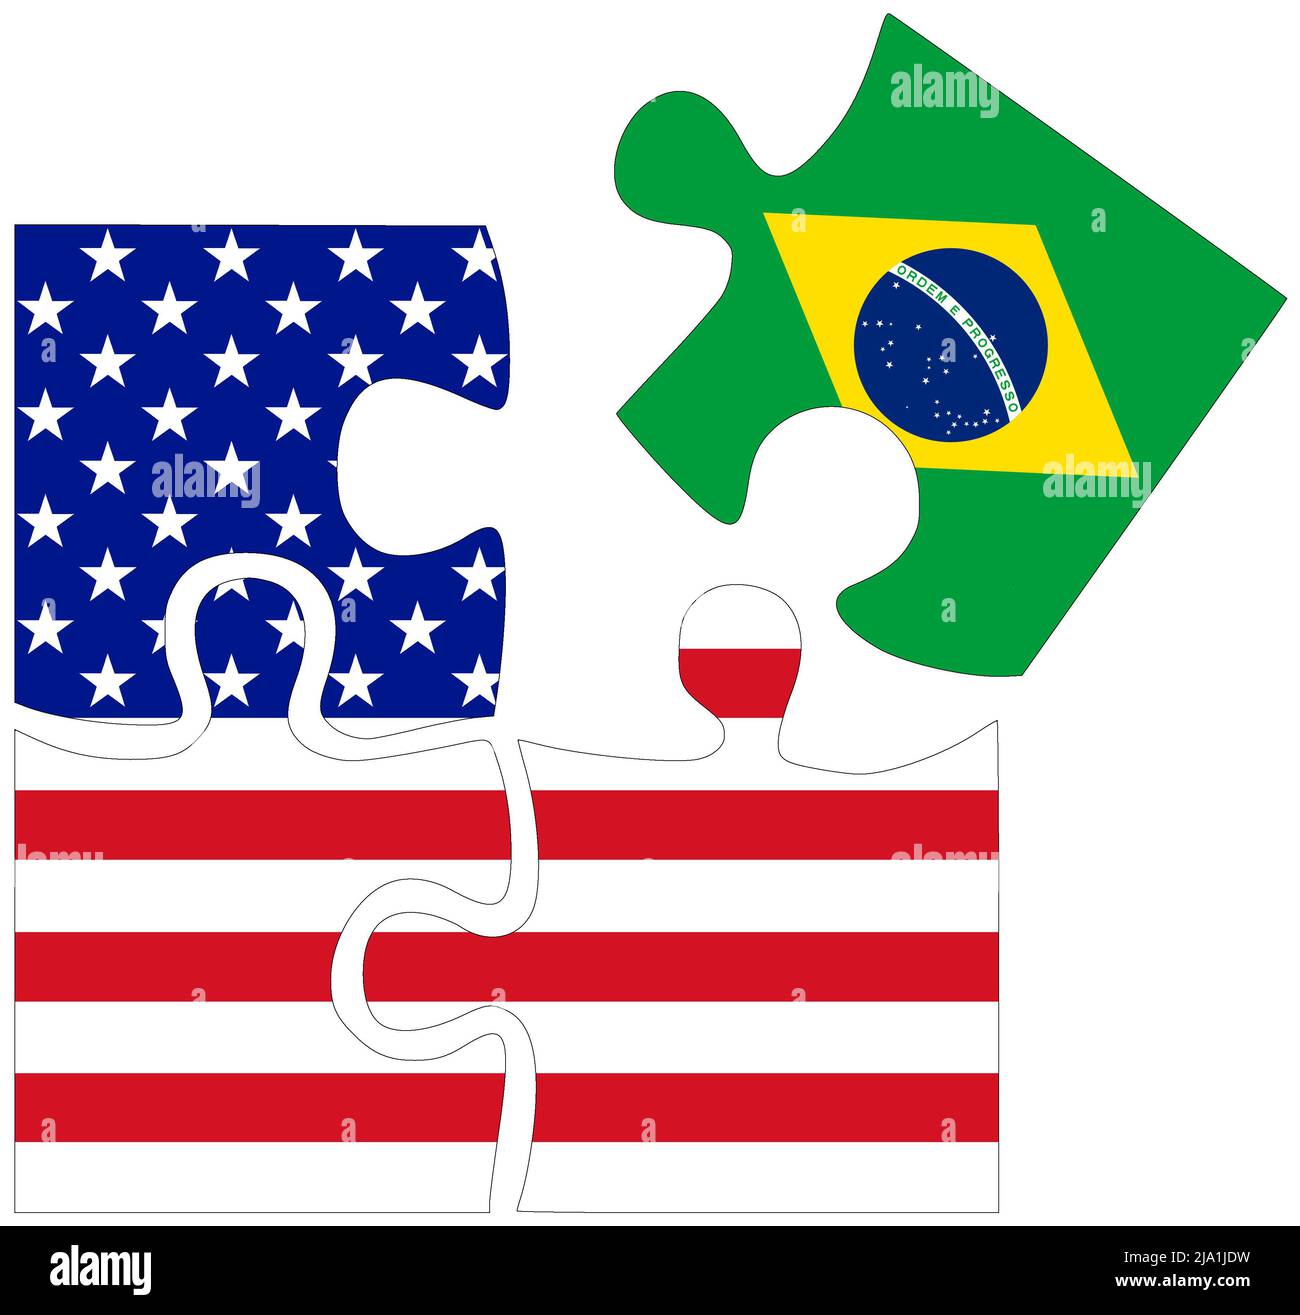 USA - Brazil : puzzle shapes with flags, symbol of agreement or friendship Stock Photo